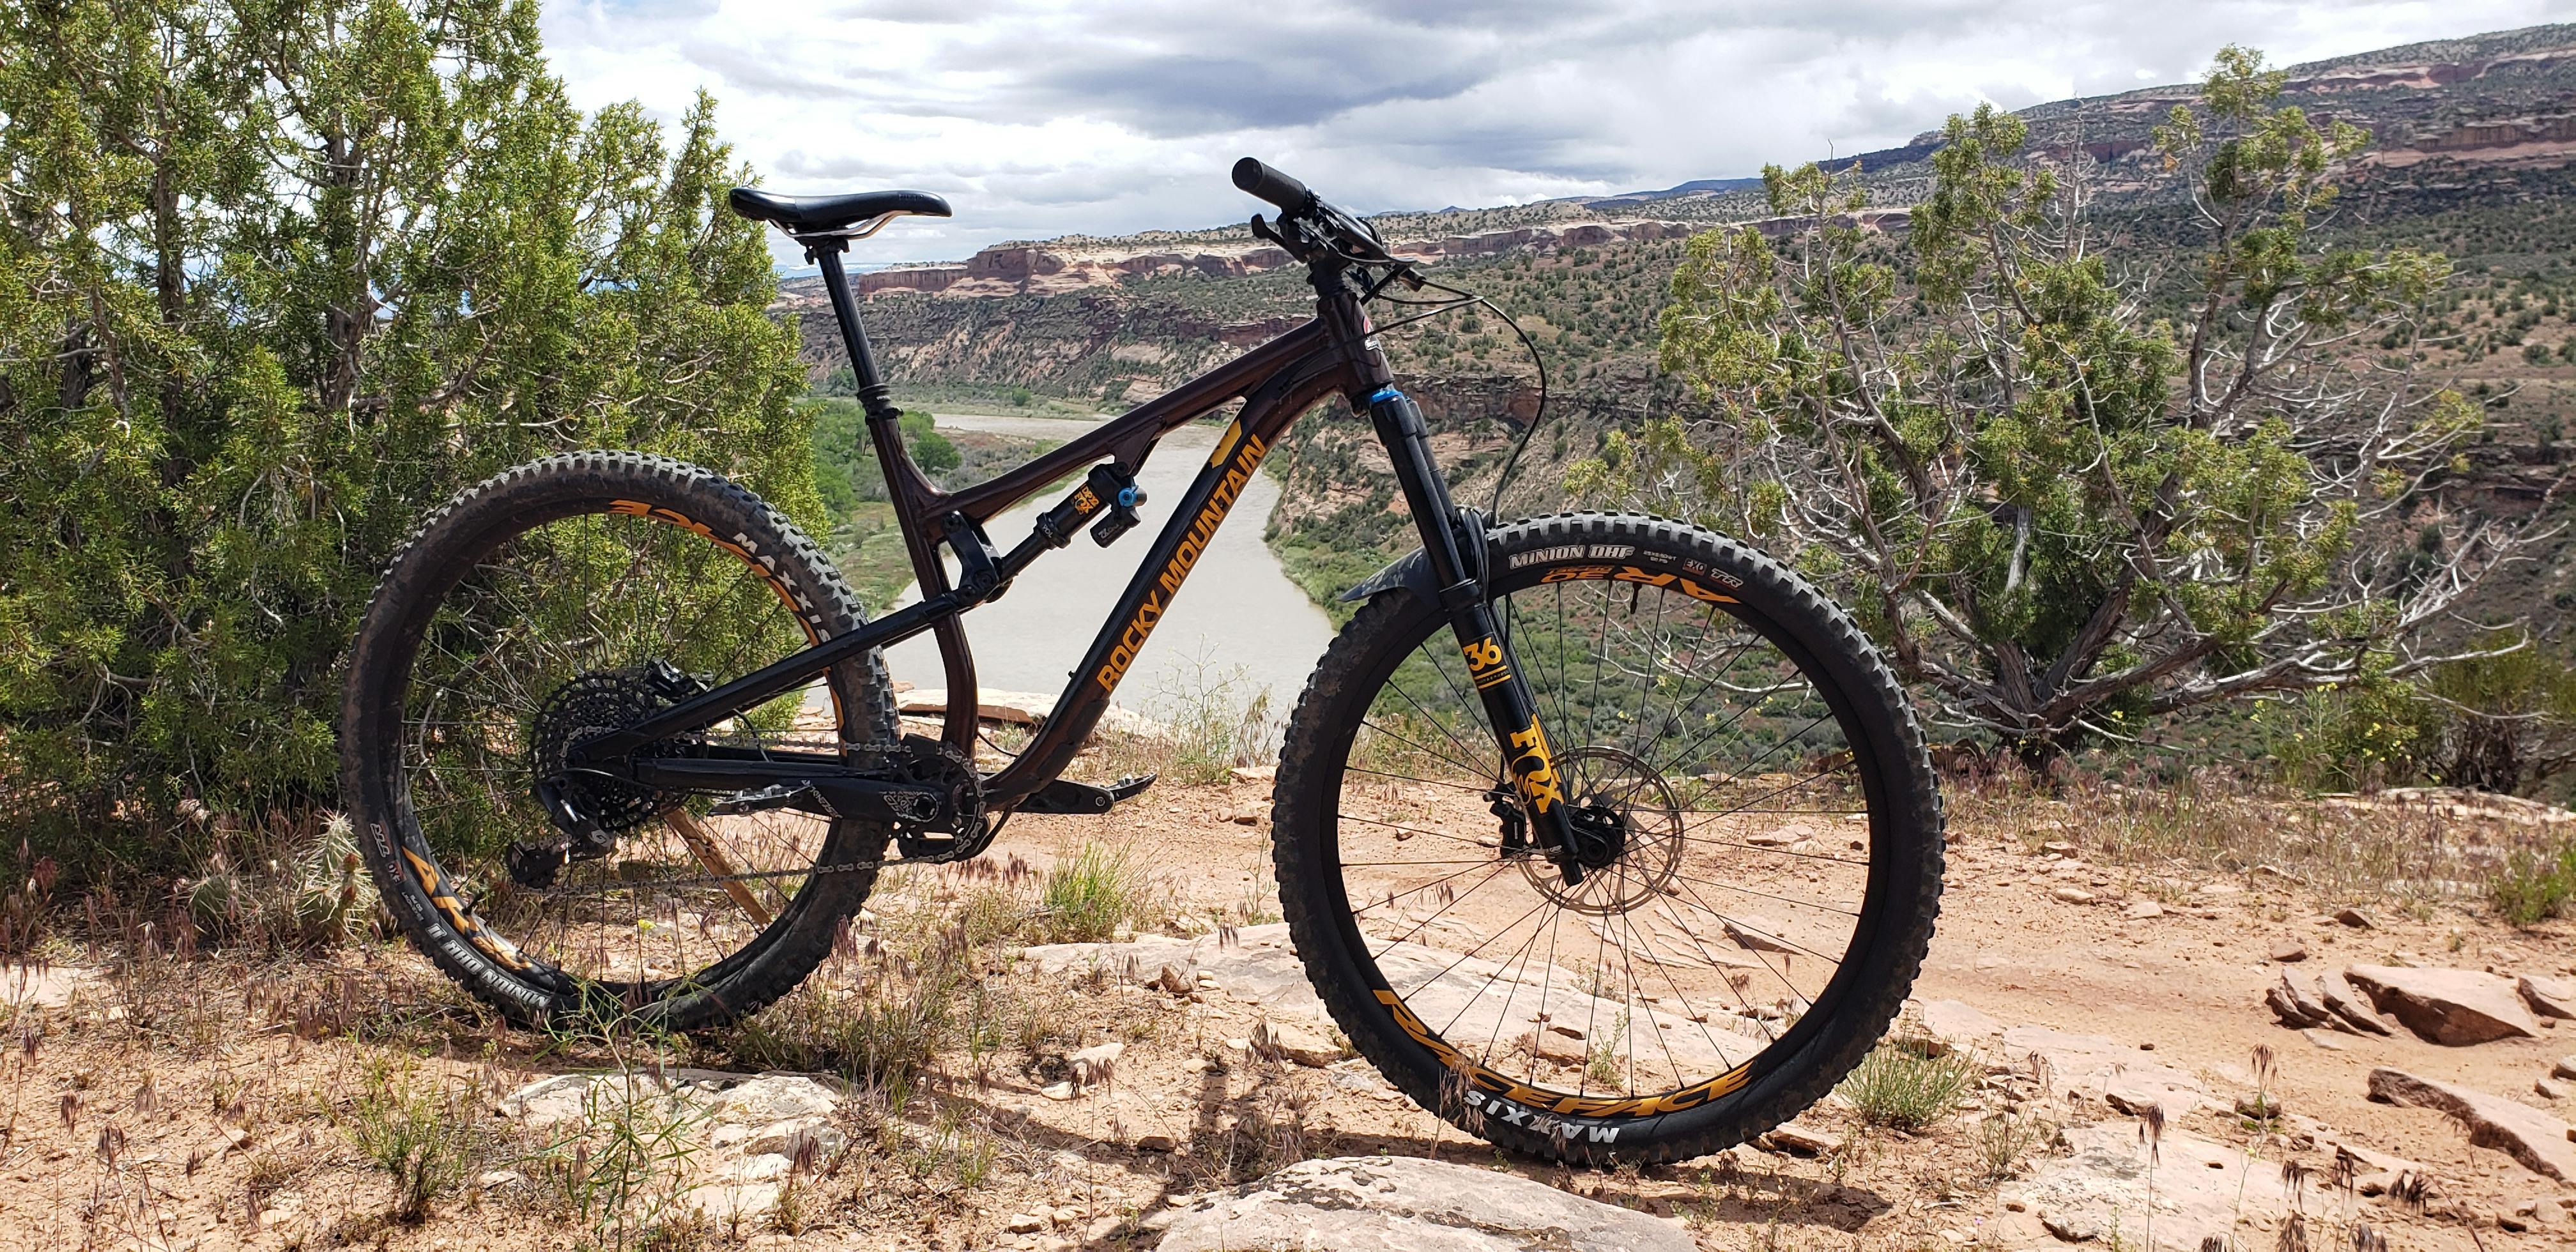 A mountain bike standing on the edge of a cliff with a river in the background